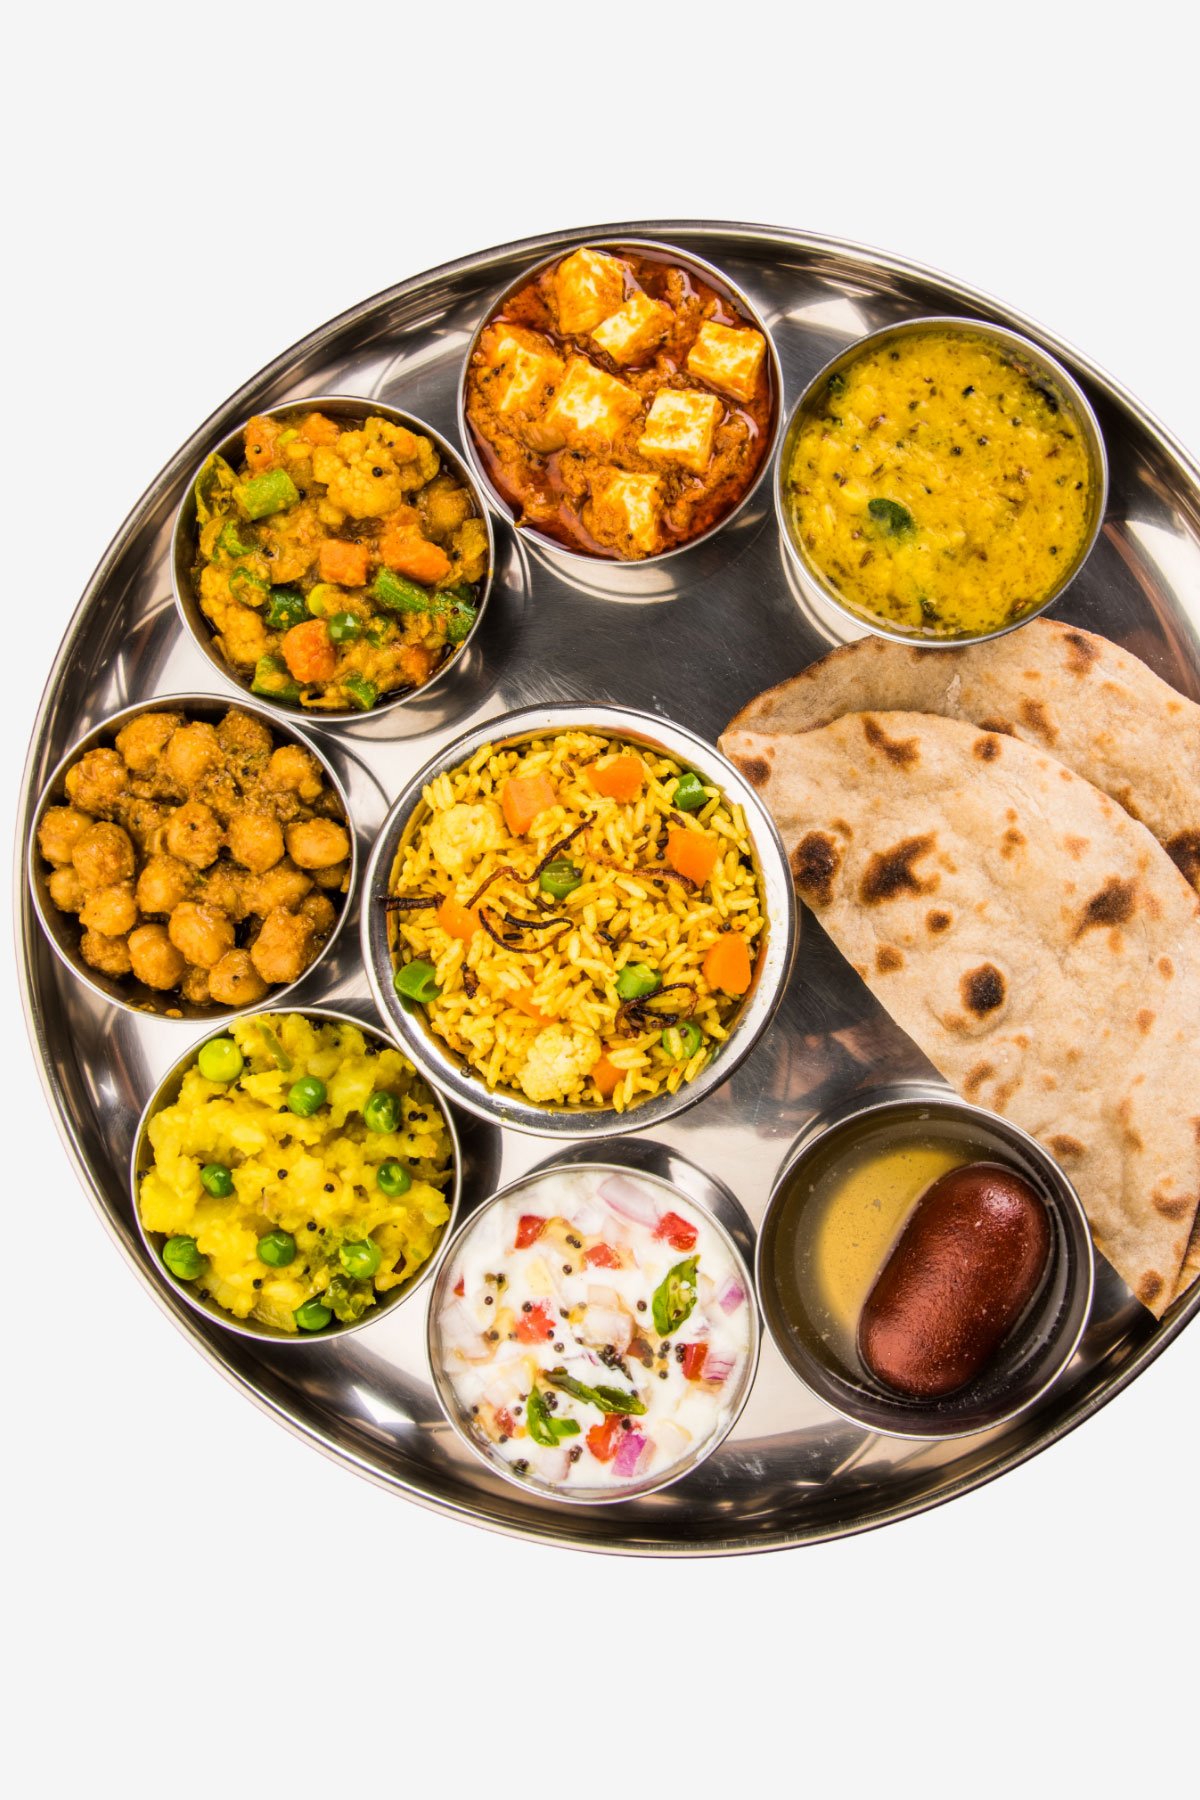 Logic of thaals and thalis in India - Why and how we eat